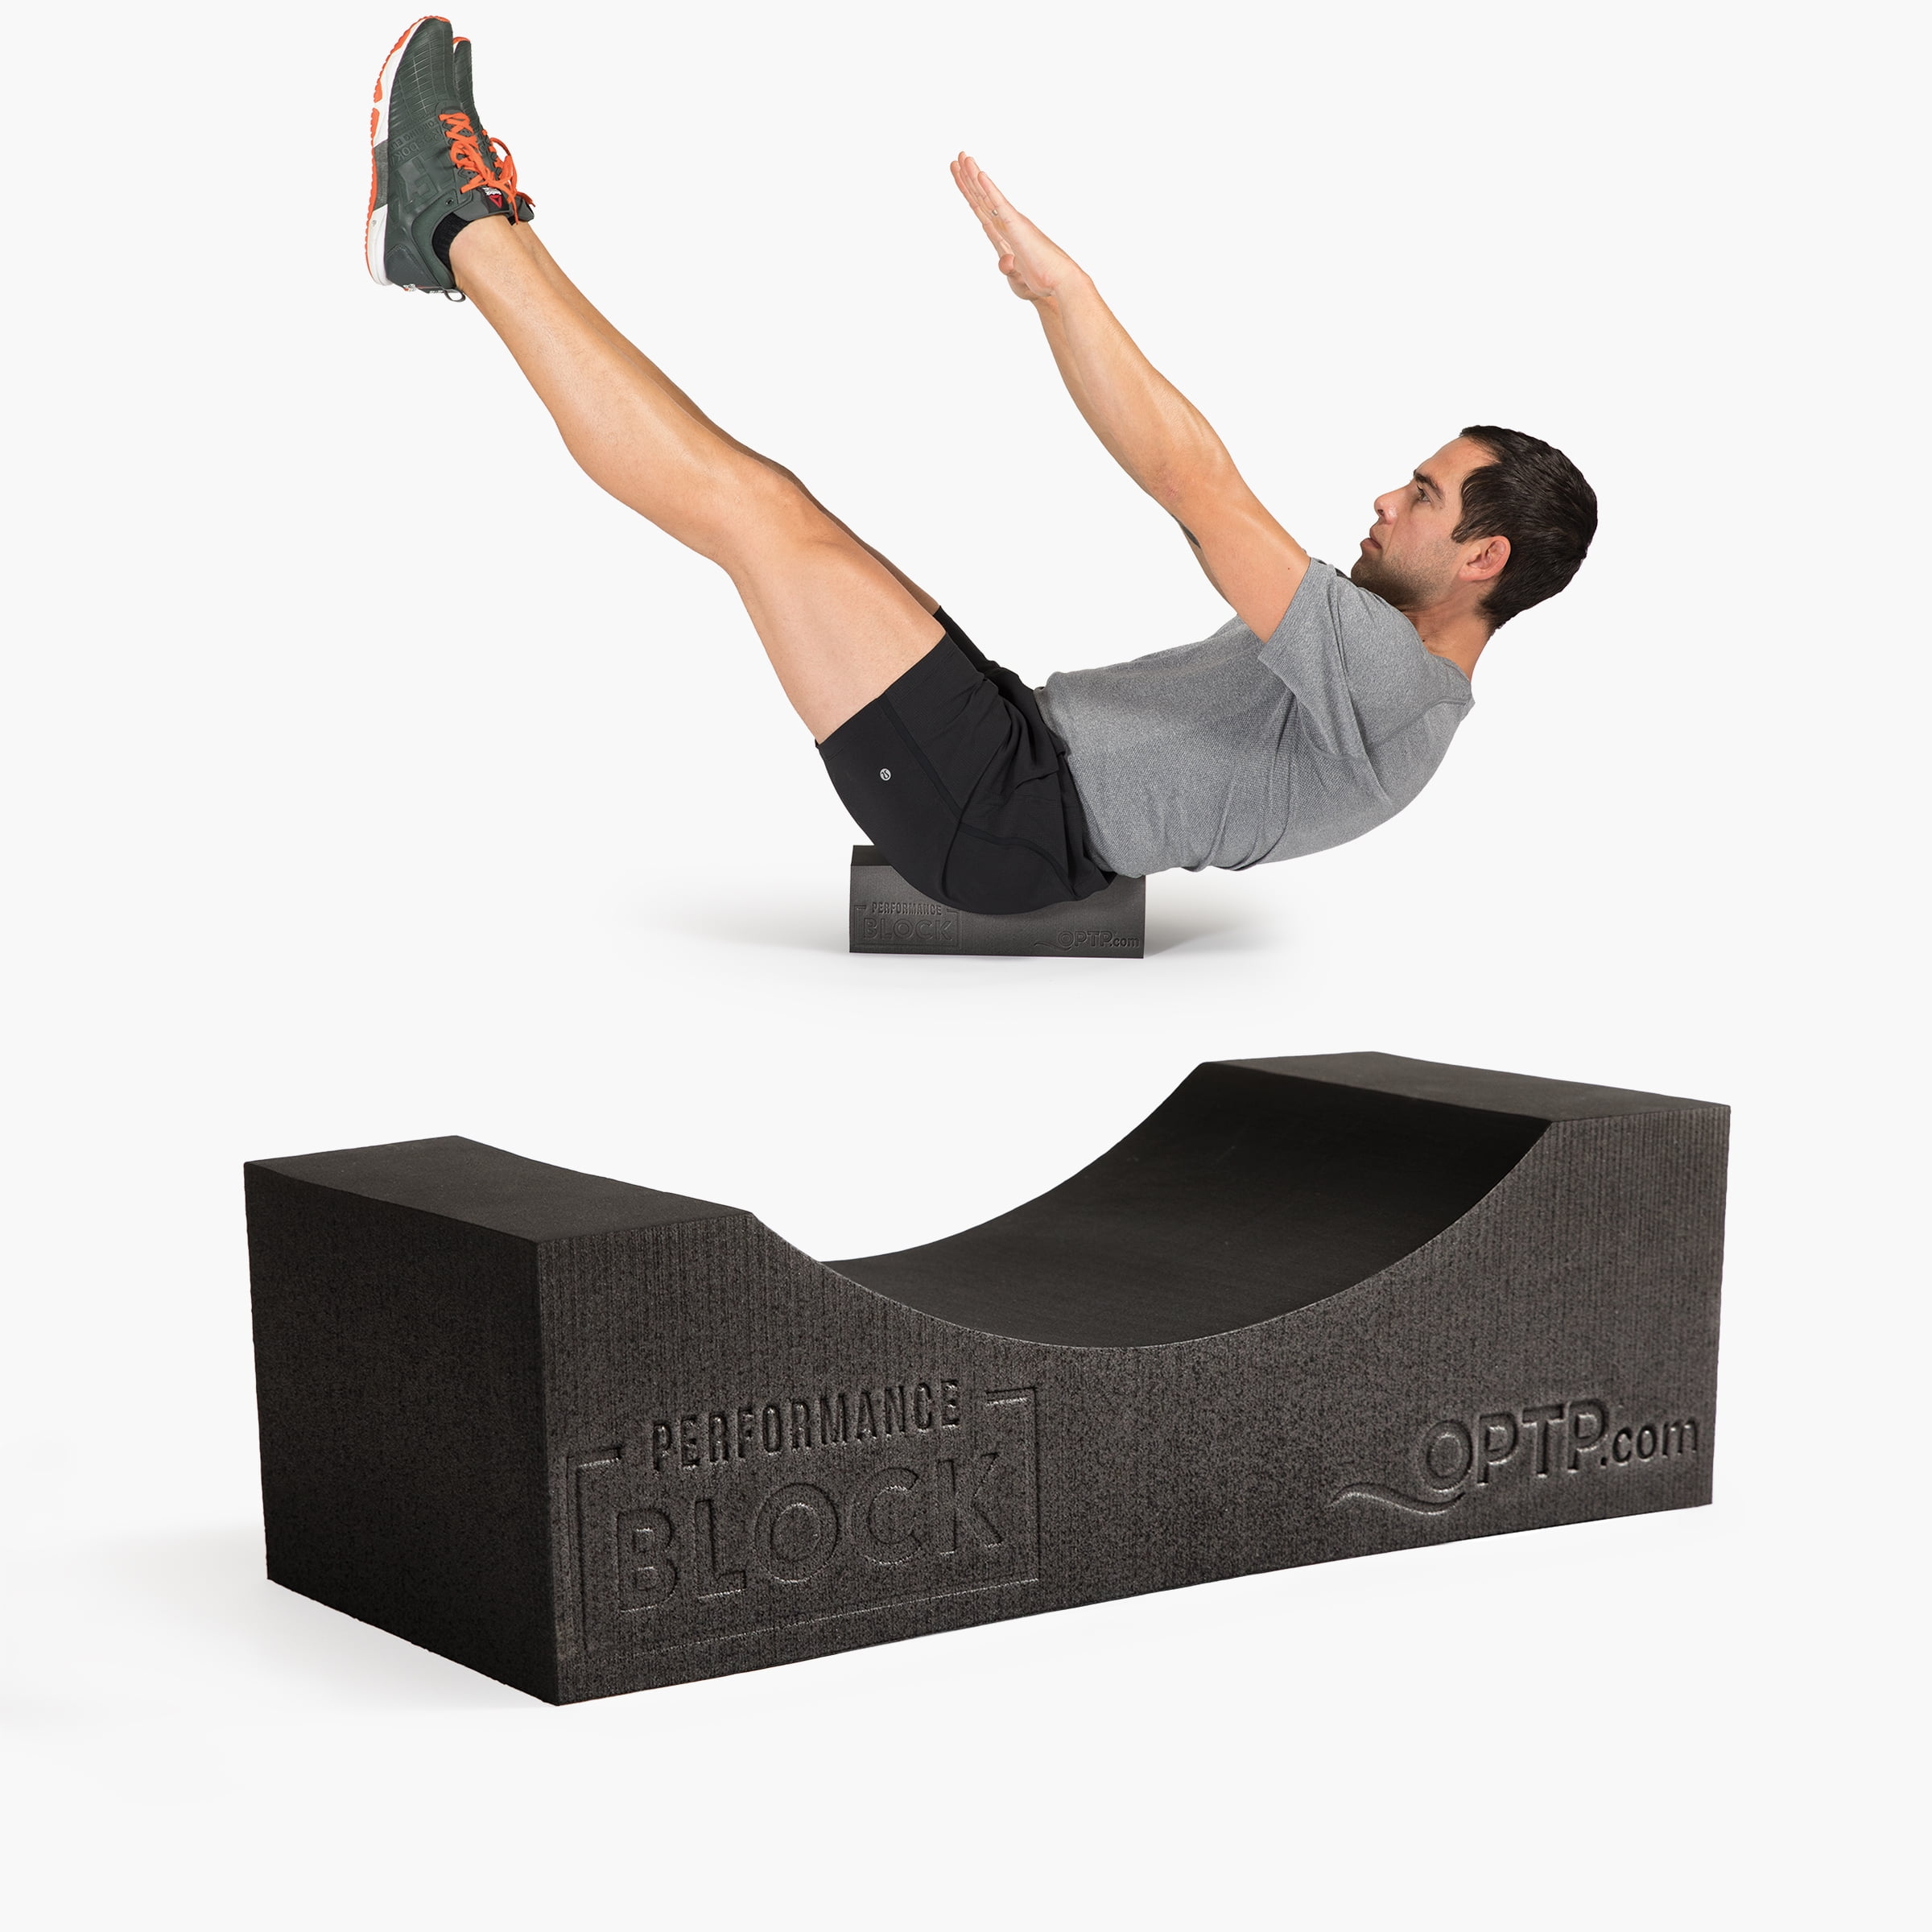 Performance Block - Foam Support for Yoga, Pilates, Physical Therapy,  Stretching, Core Strength, and Functional Fitness Exercise 